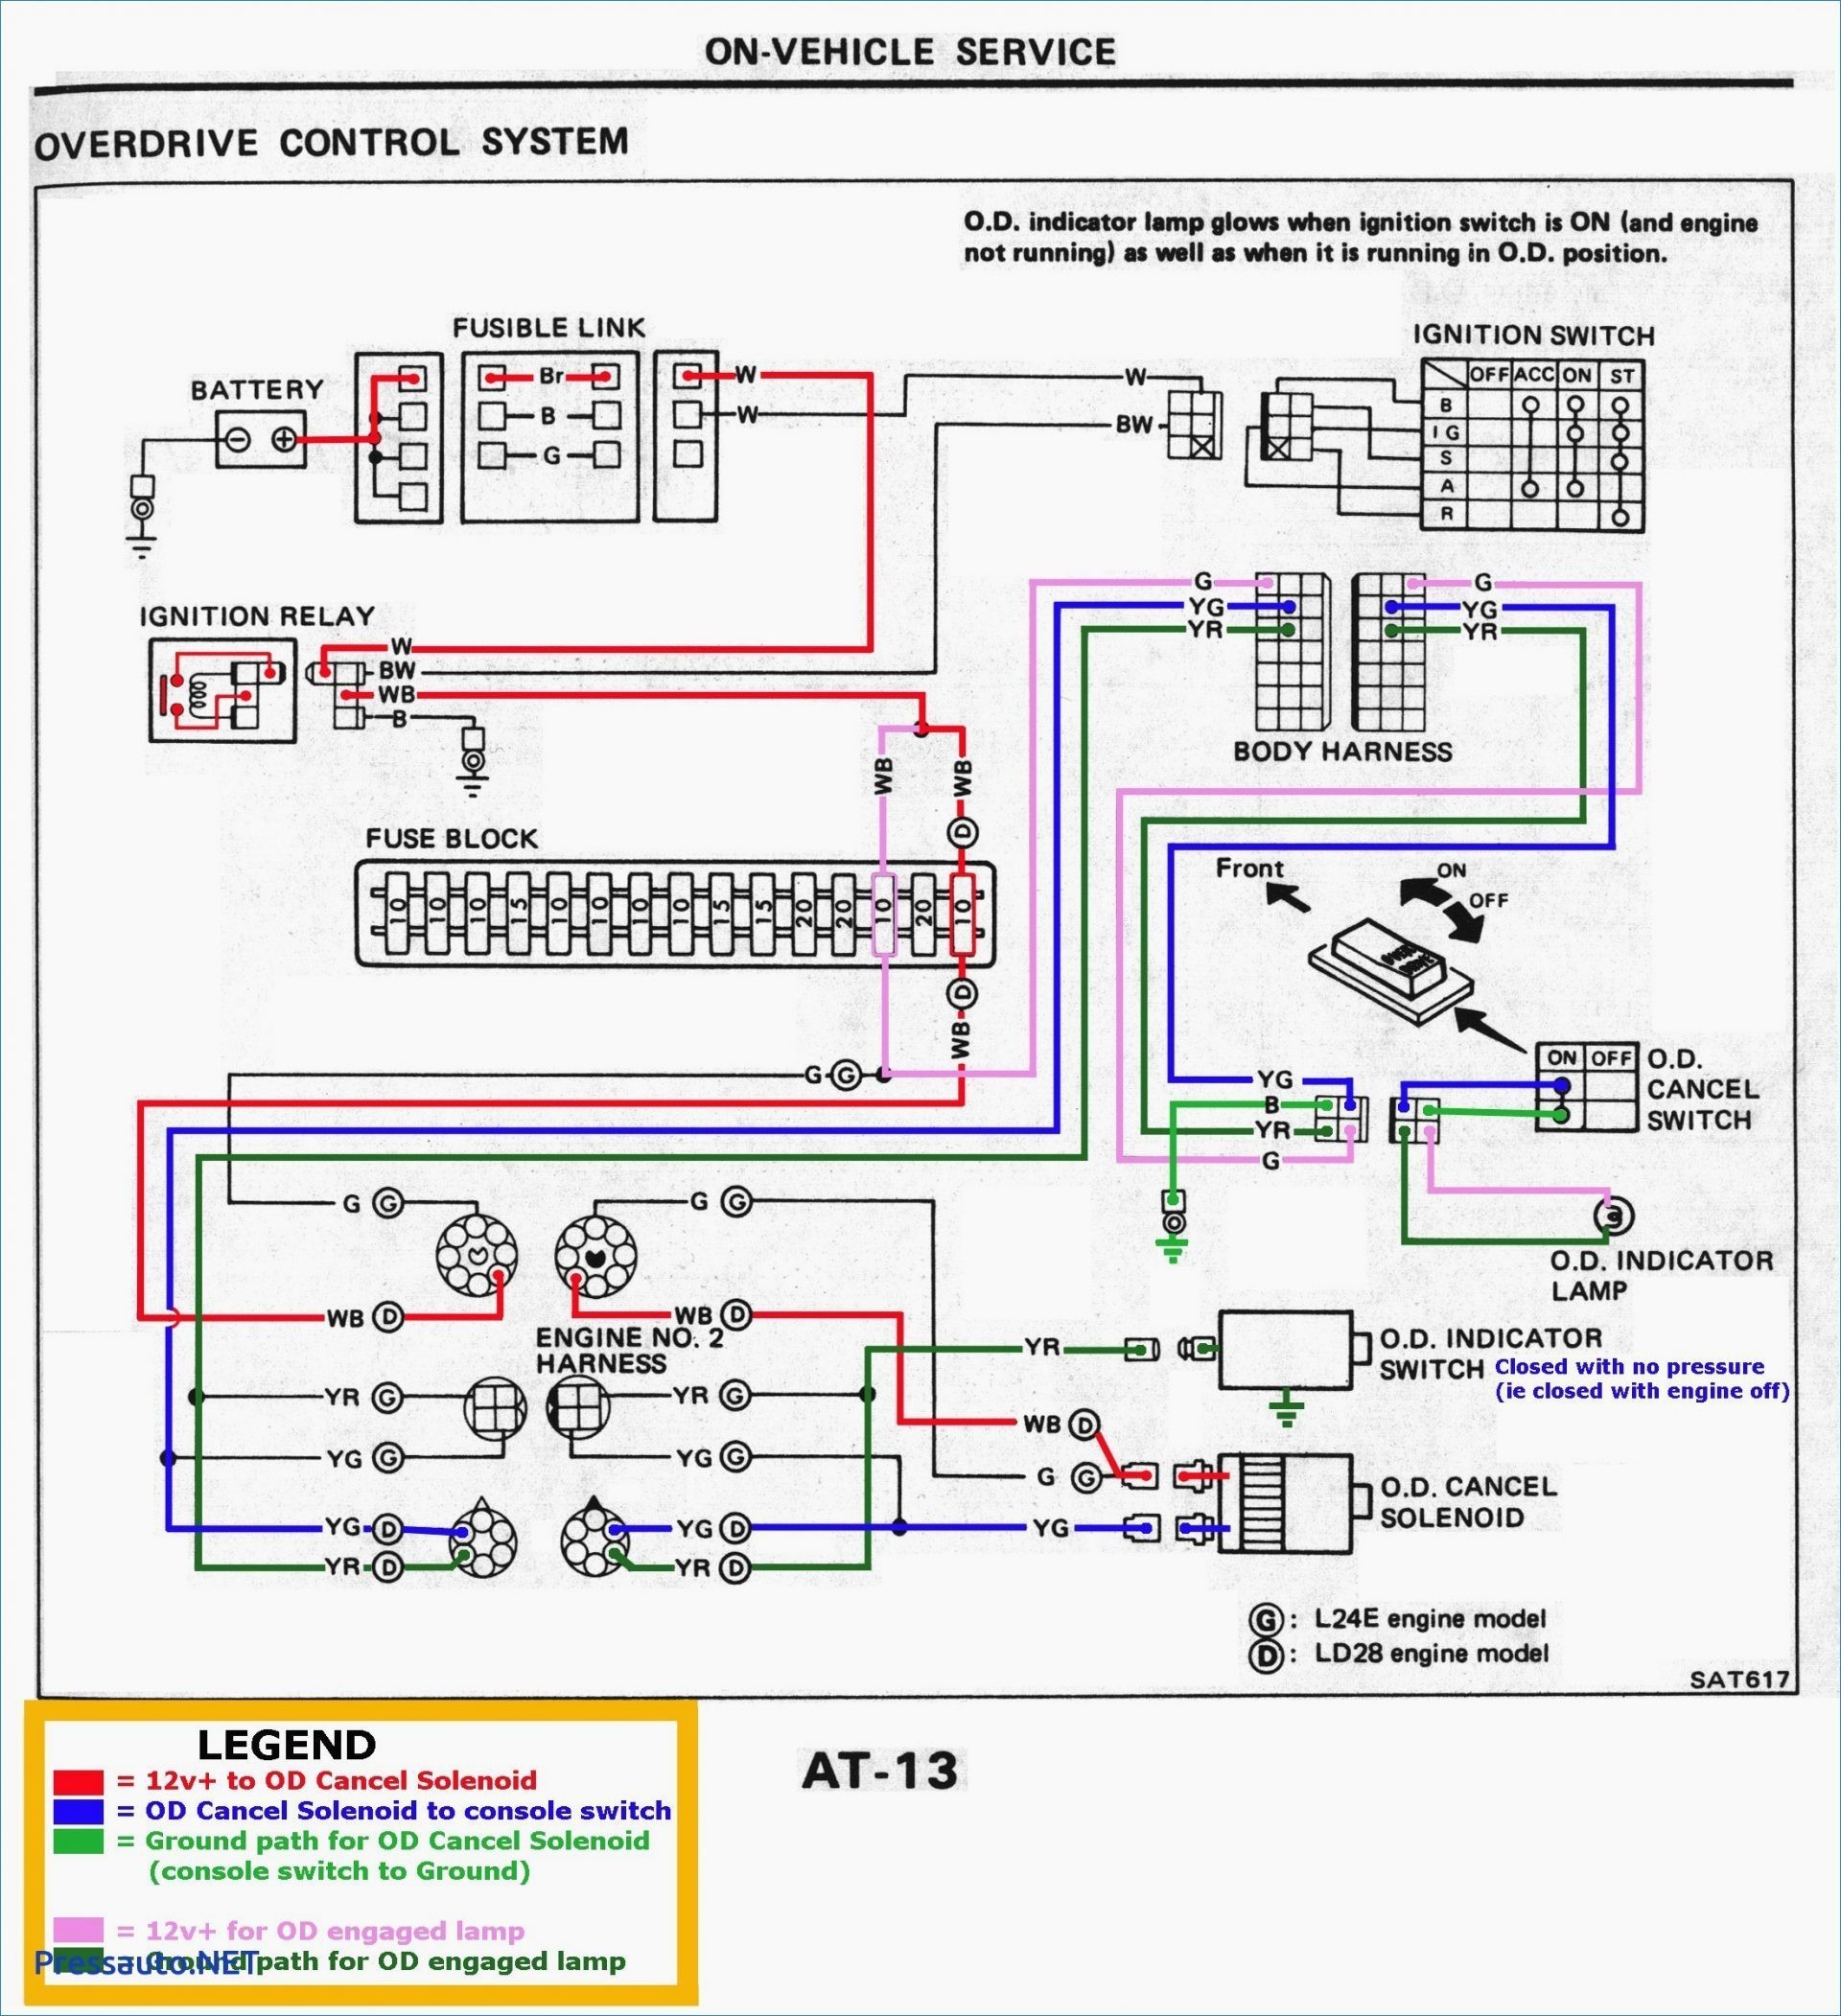 Grote Lights Wiring Diagram 3 Wire Tail Light Diagram Diagram Base Website Light Diagram